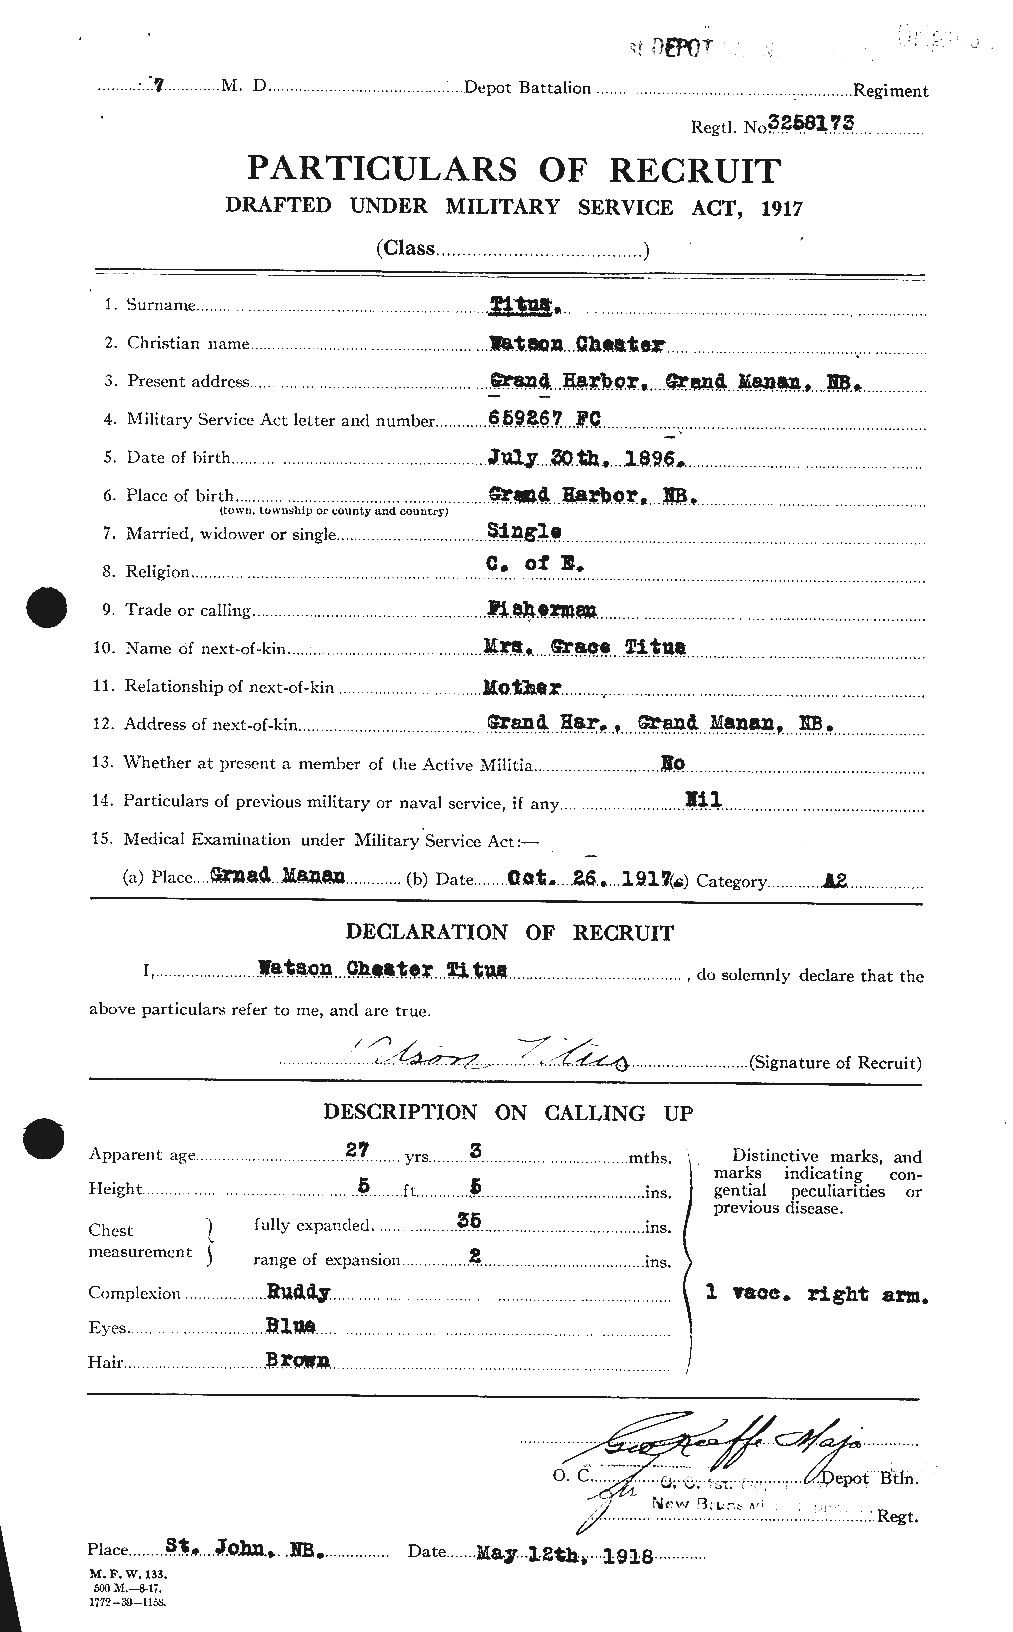 Personnel Records of the First World War - CEF 634989a